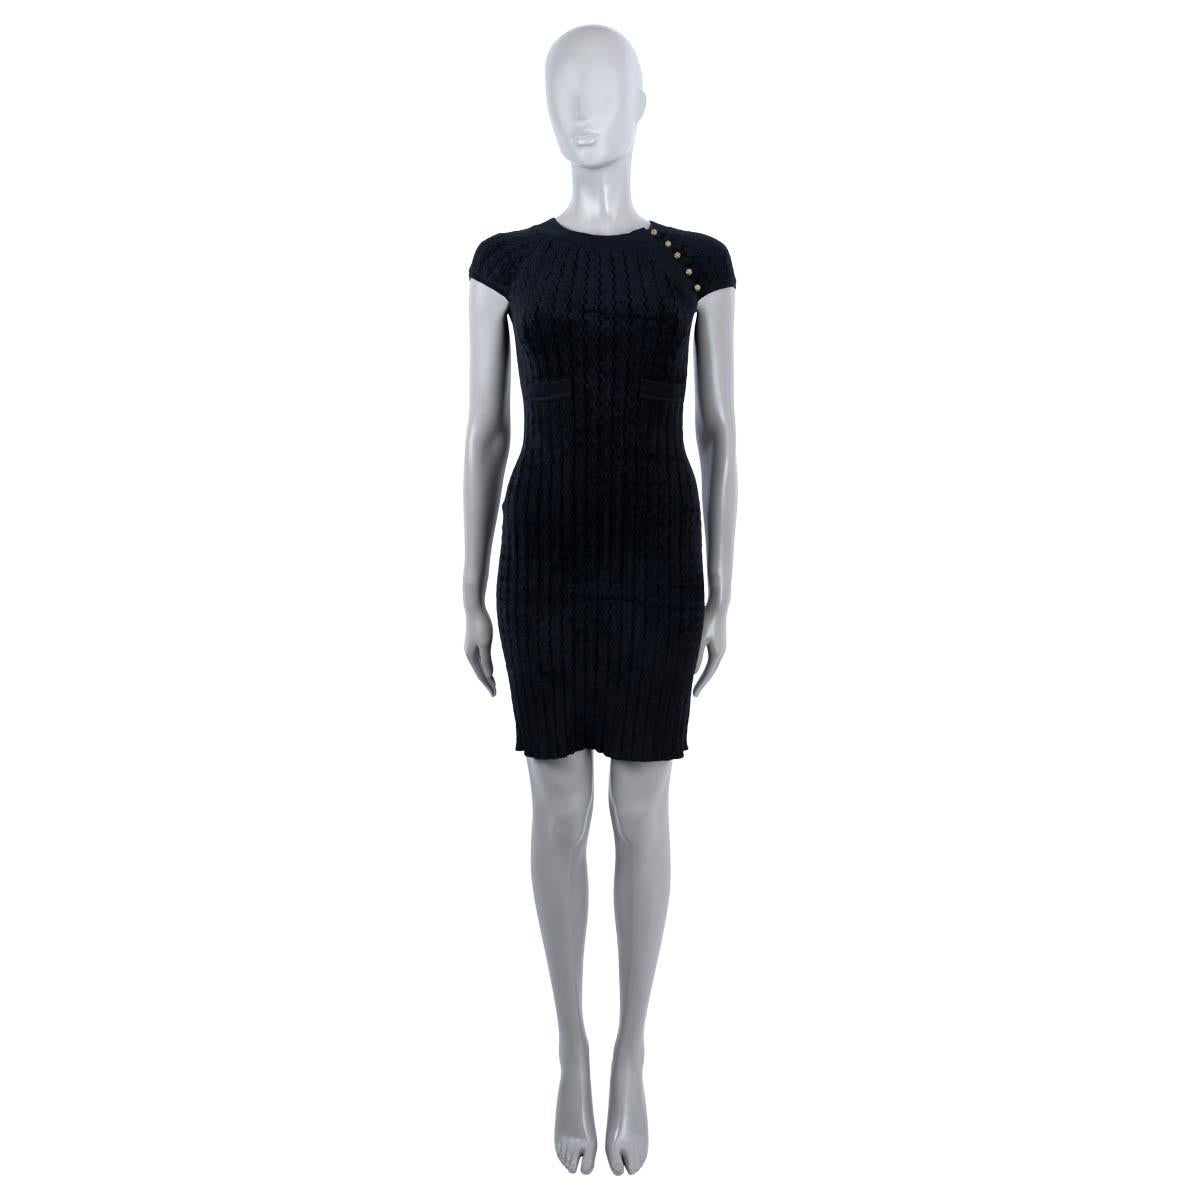 100% authentic Chanel cap sleeve rib knit dress in black viscose (63%) and polyamide (27%). Features 2 pockets on the front. Opens with five CC buttons at the neck. Has been worn and is in excellent condition.

2010 Paris-Shanghai Metiers d'Art